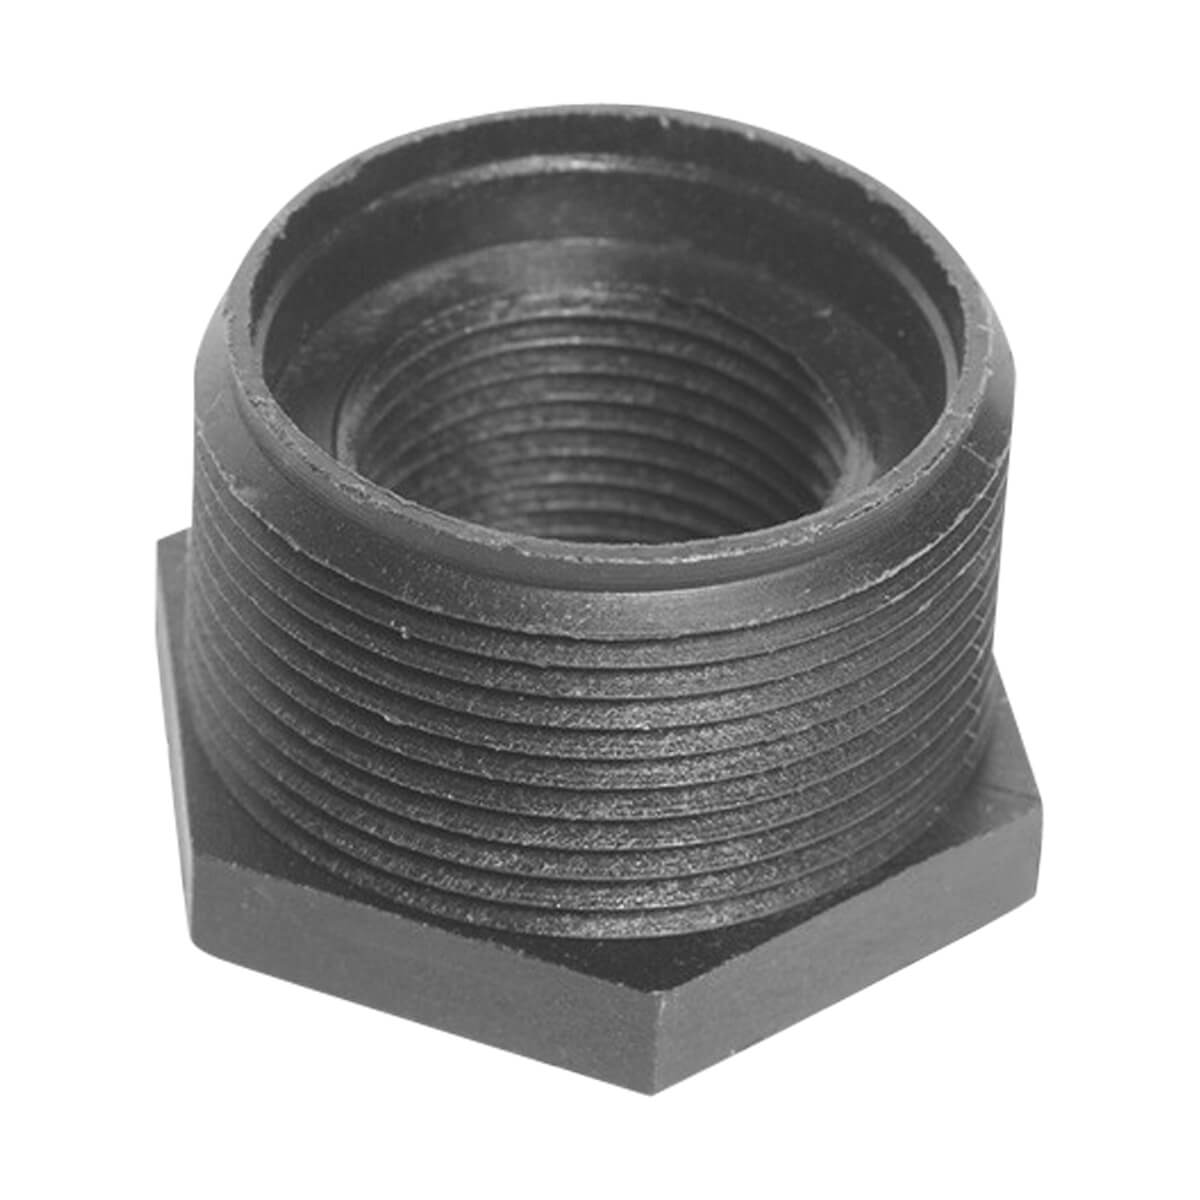 Reducer Bushings MPT x FPT - 2-in x 1-1/2-in